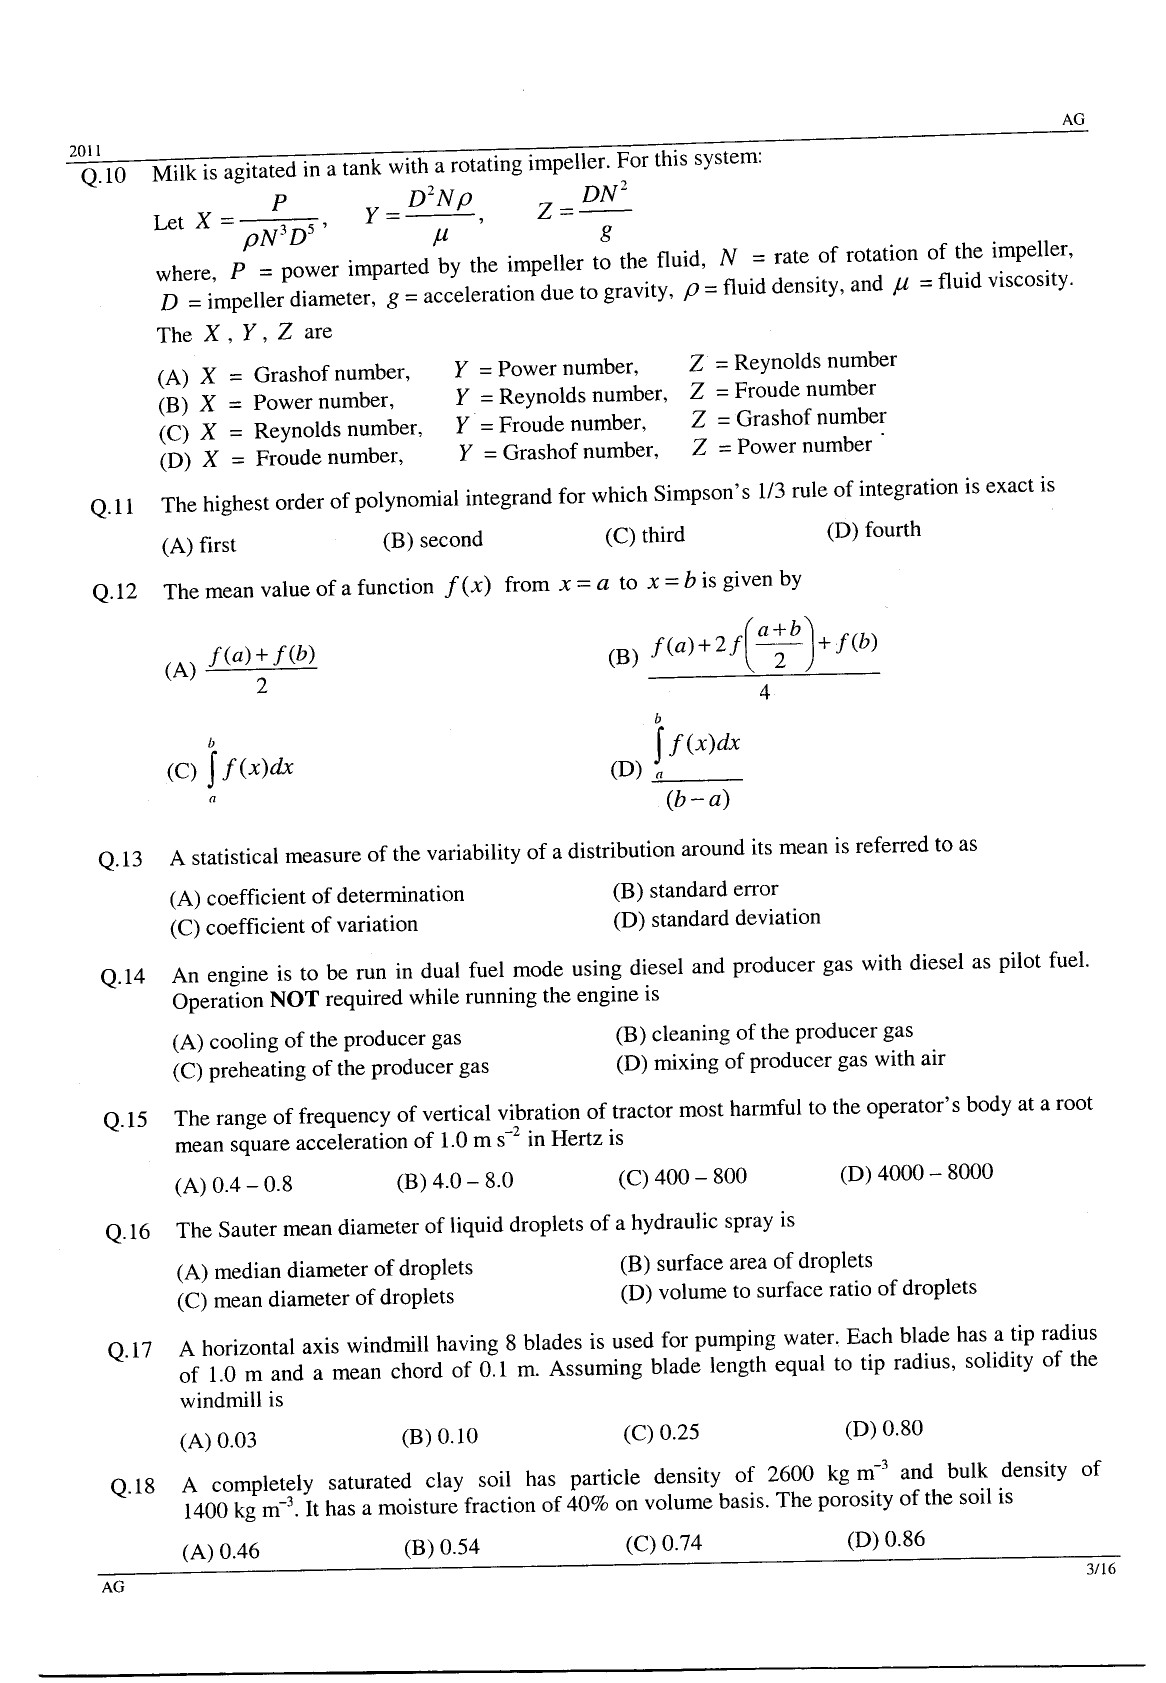 GATE Exam Question Paper 2011 Agricultural Engineering 3